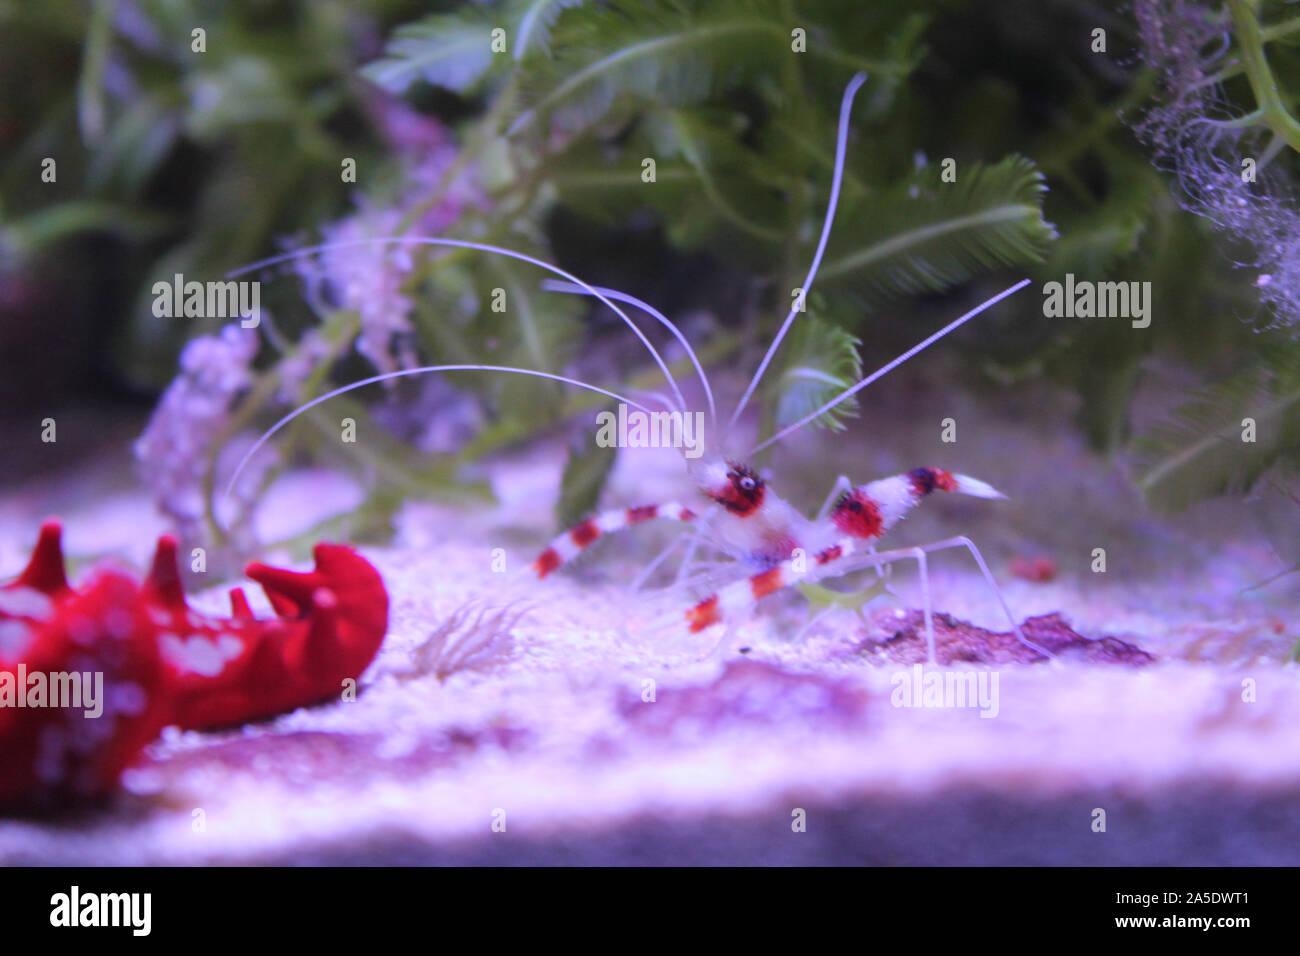 Banded coral or cleaner shrimp on the sea bottom. Side view. Red and white striped underwater inhabitant. Sea and ocean life. Diving, oceanarium or aq Stock Photo